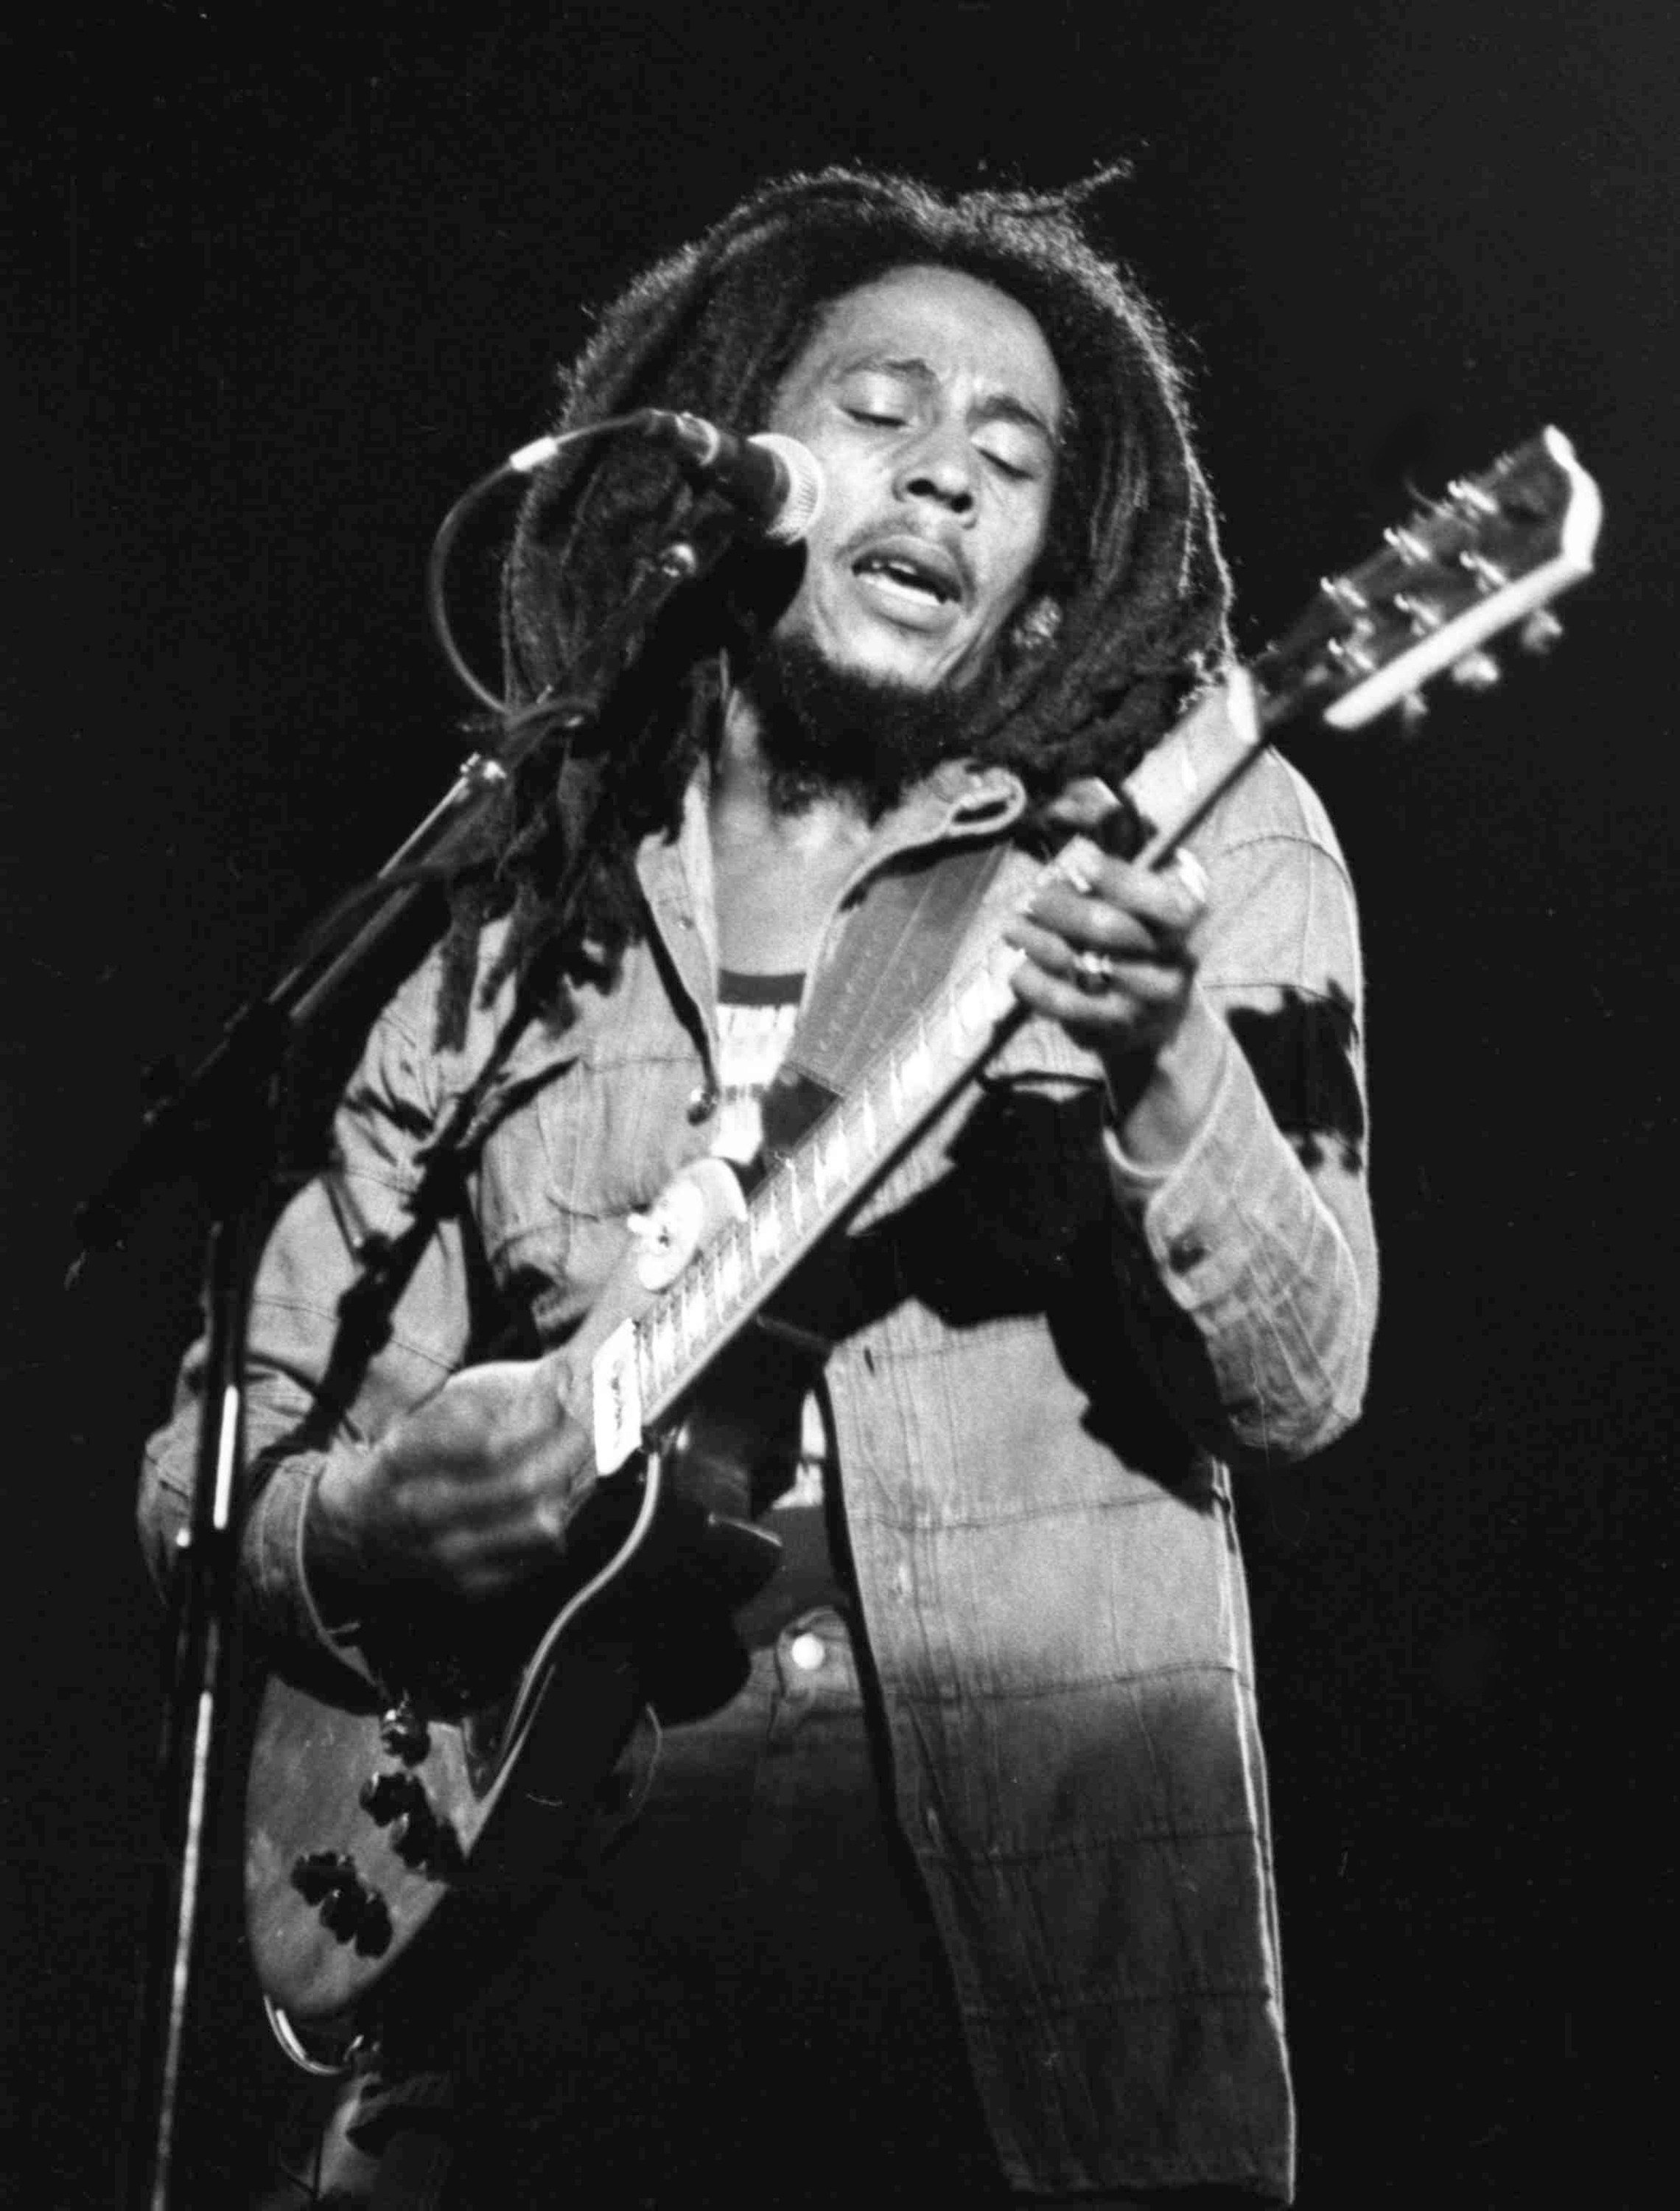 FILE - In this July 4, 1980 file photo, Jamaican reggae singer Bob Marley performs at a reggae festival concert in Paris. The family of Bob Marley are covering his song “One Love” to raise money for coronavirus relief efforts. (AP Photo/File)